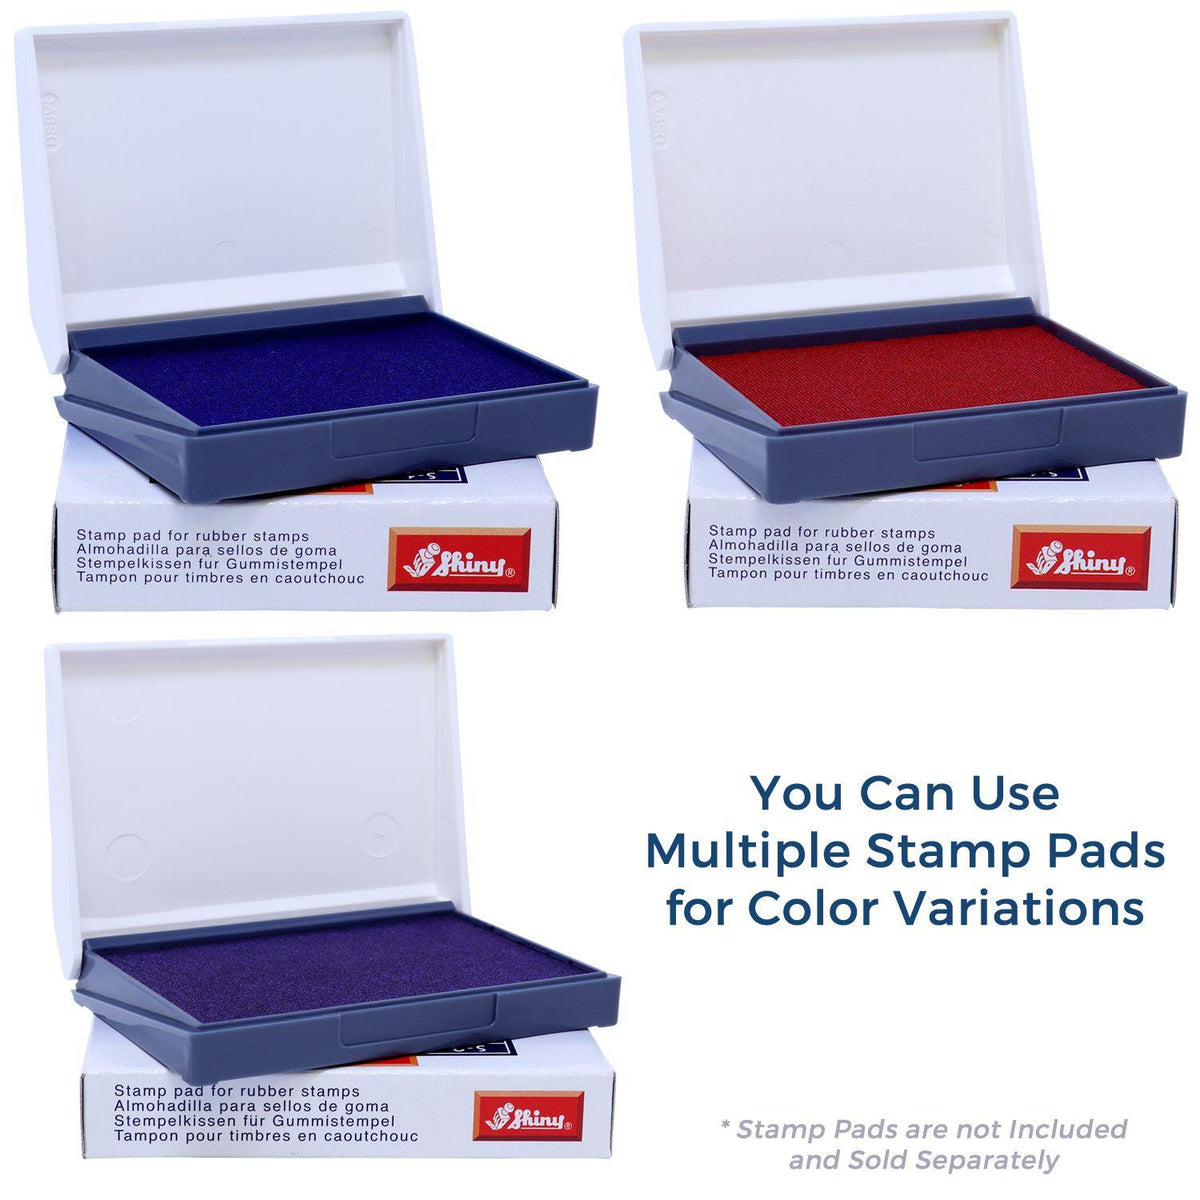 Stamp Pads for Large Priority Mail International Rubber Stamp Available